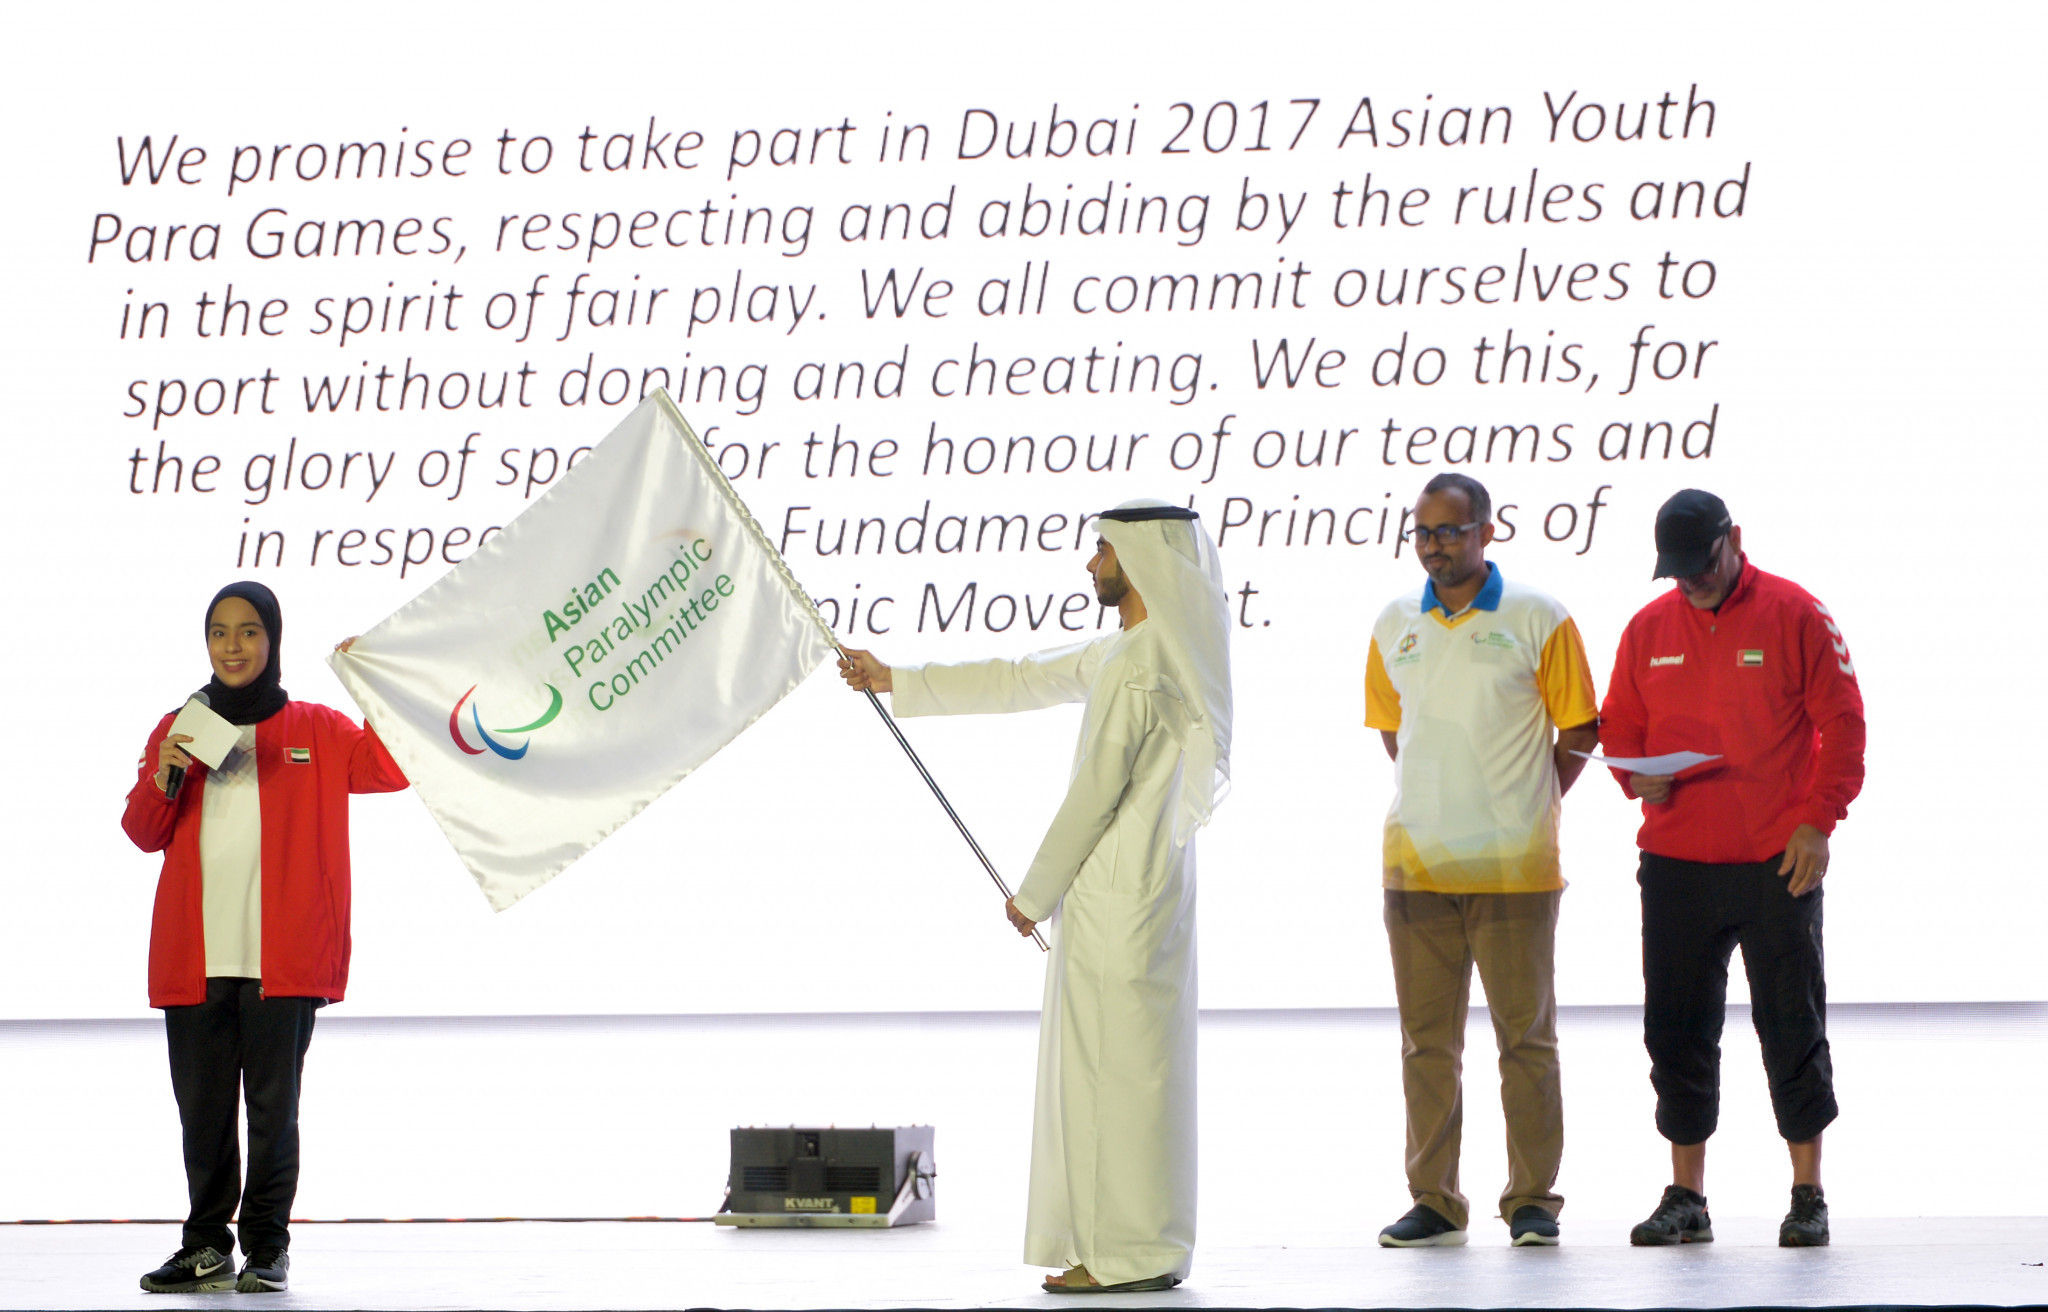 Asian Youth Para Games 2017 are formally opened in Dubai with a parade of 800 athletes